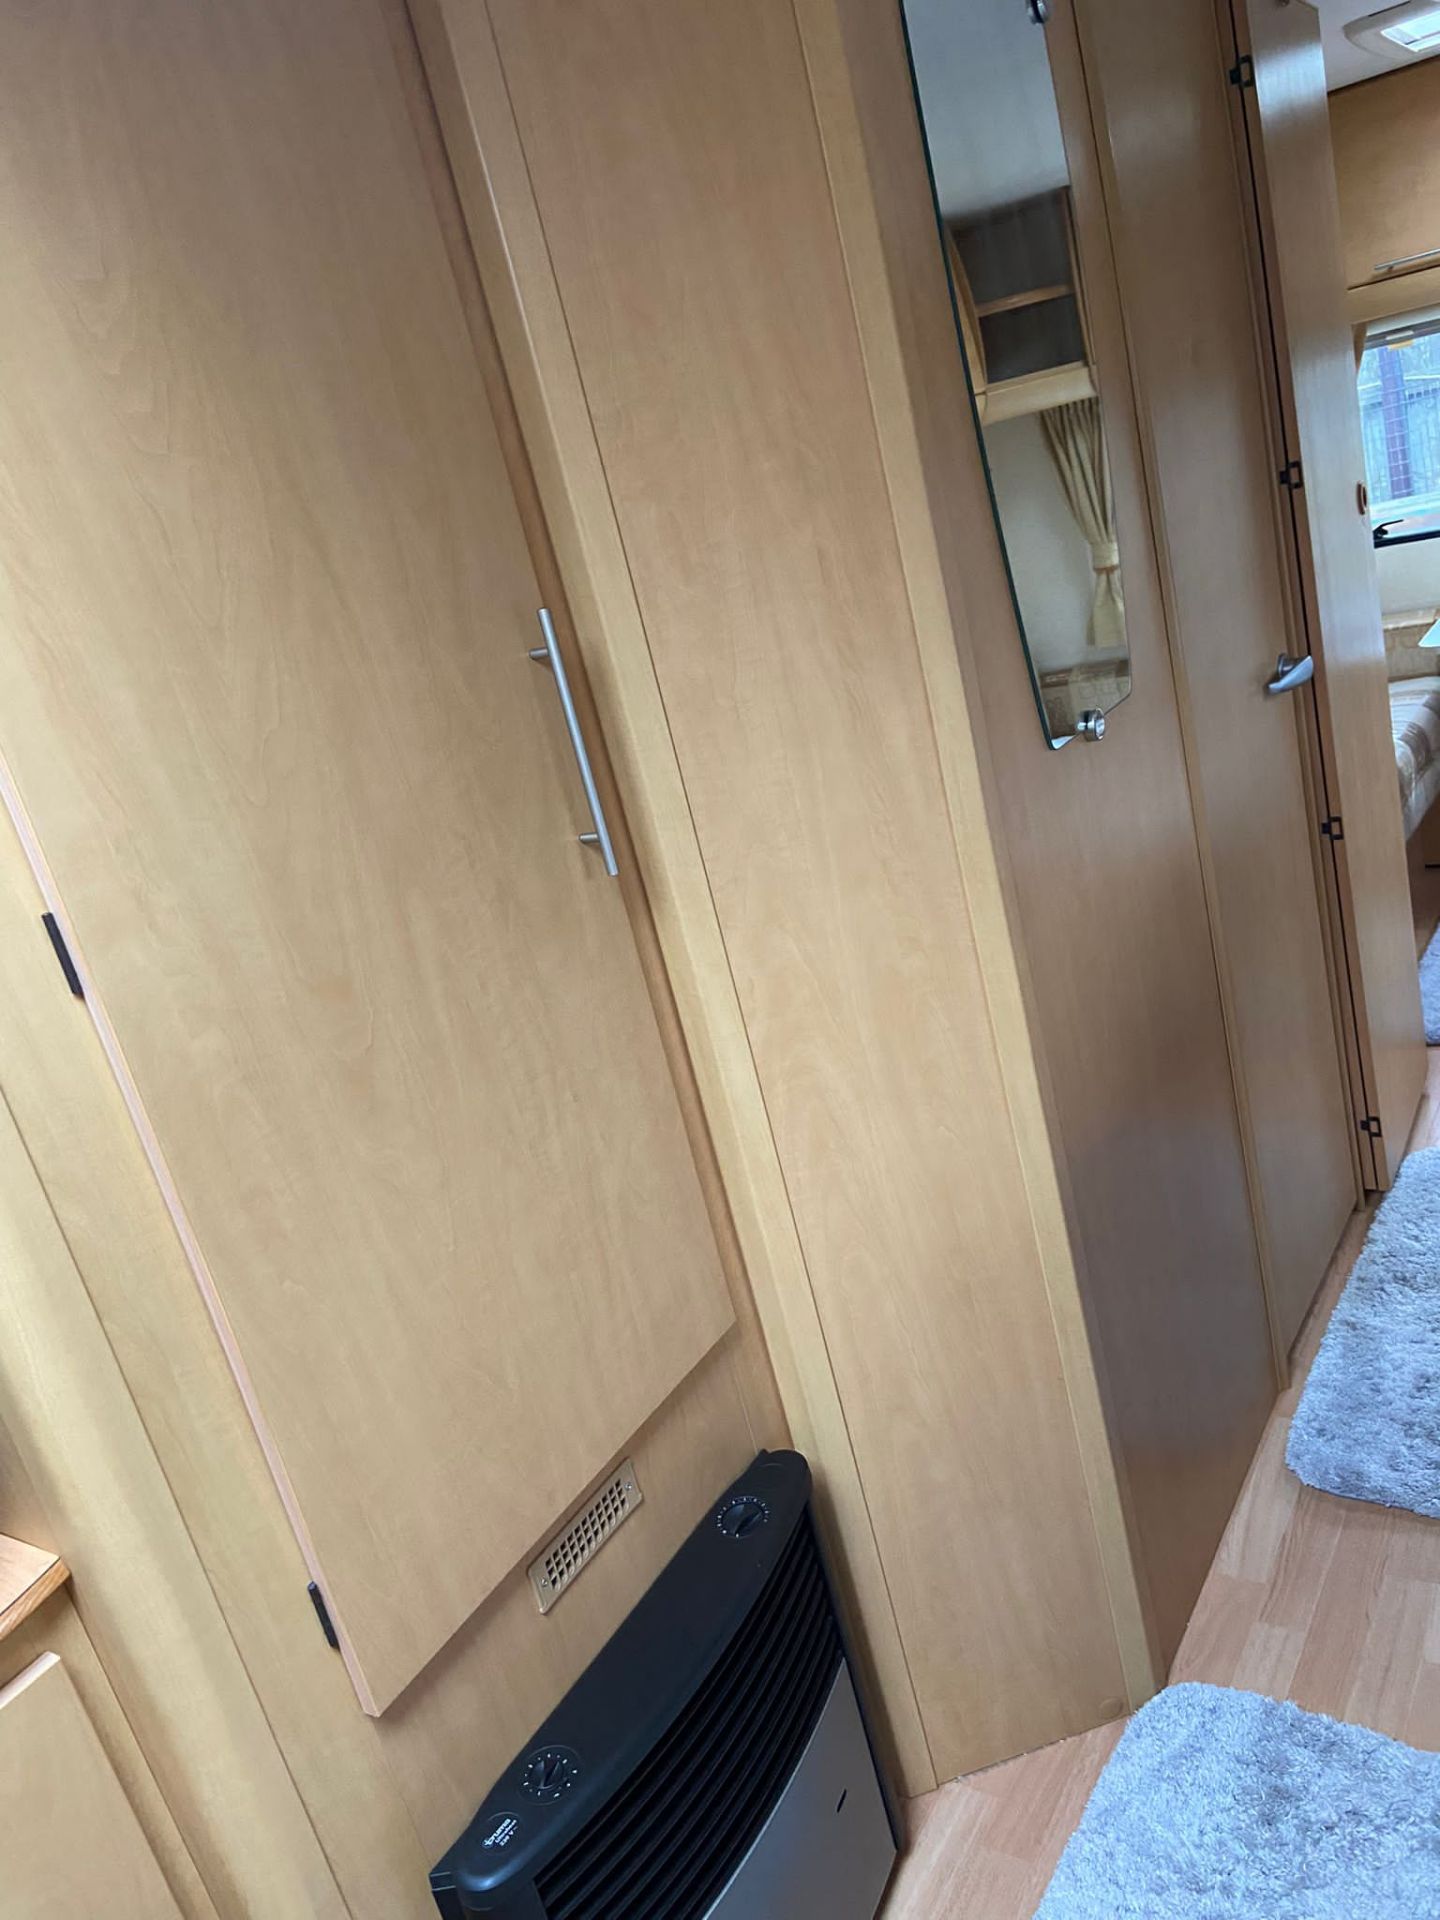 ** ON SALE ** Bailey Pageant series 6 - 4 Berth - '2007 Year' Middle Bathroom - No Vat - Image 10 of 11